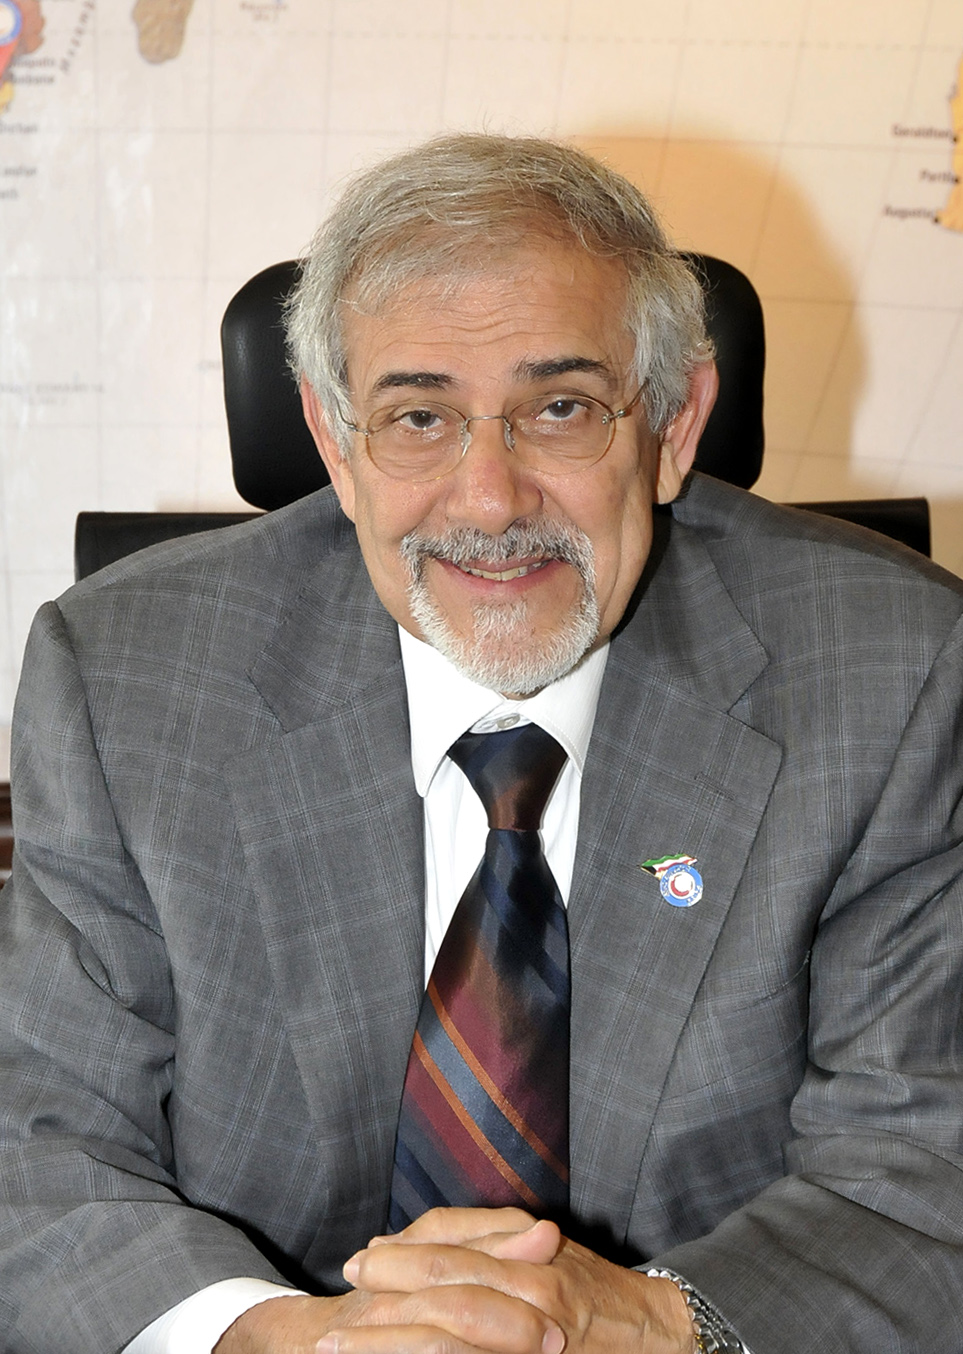 Chairman of Kuwait Red Crescent Society (KRCS) Hilal Al-Sayer